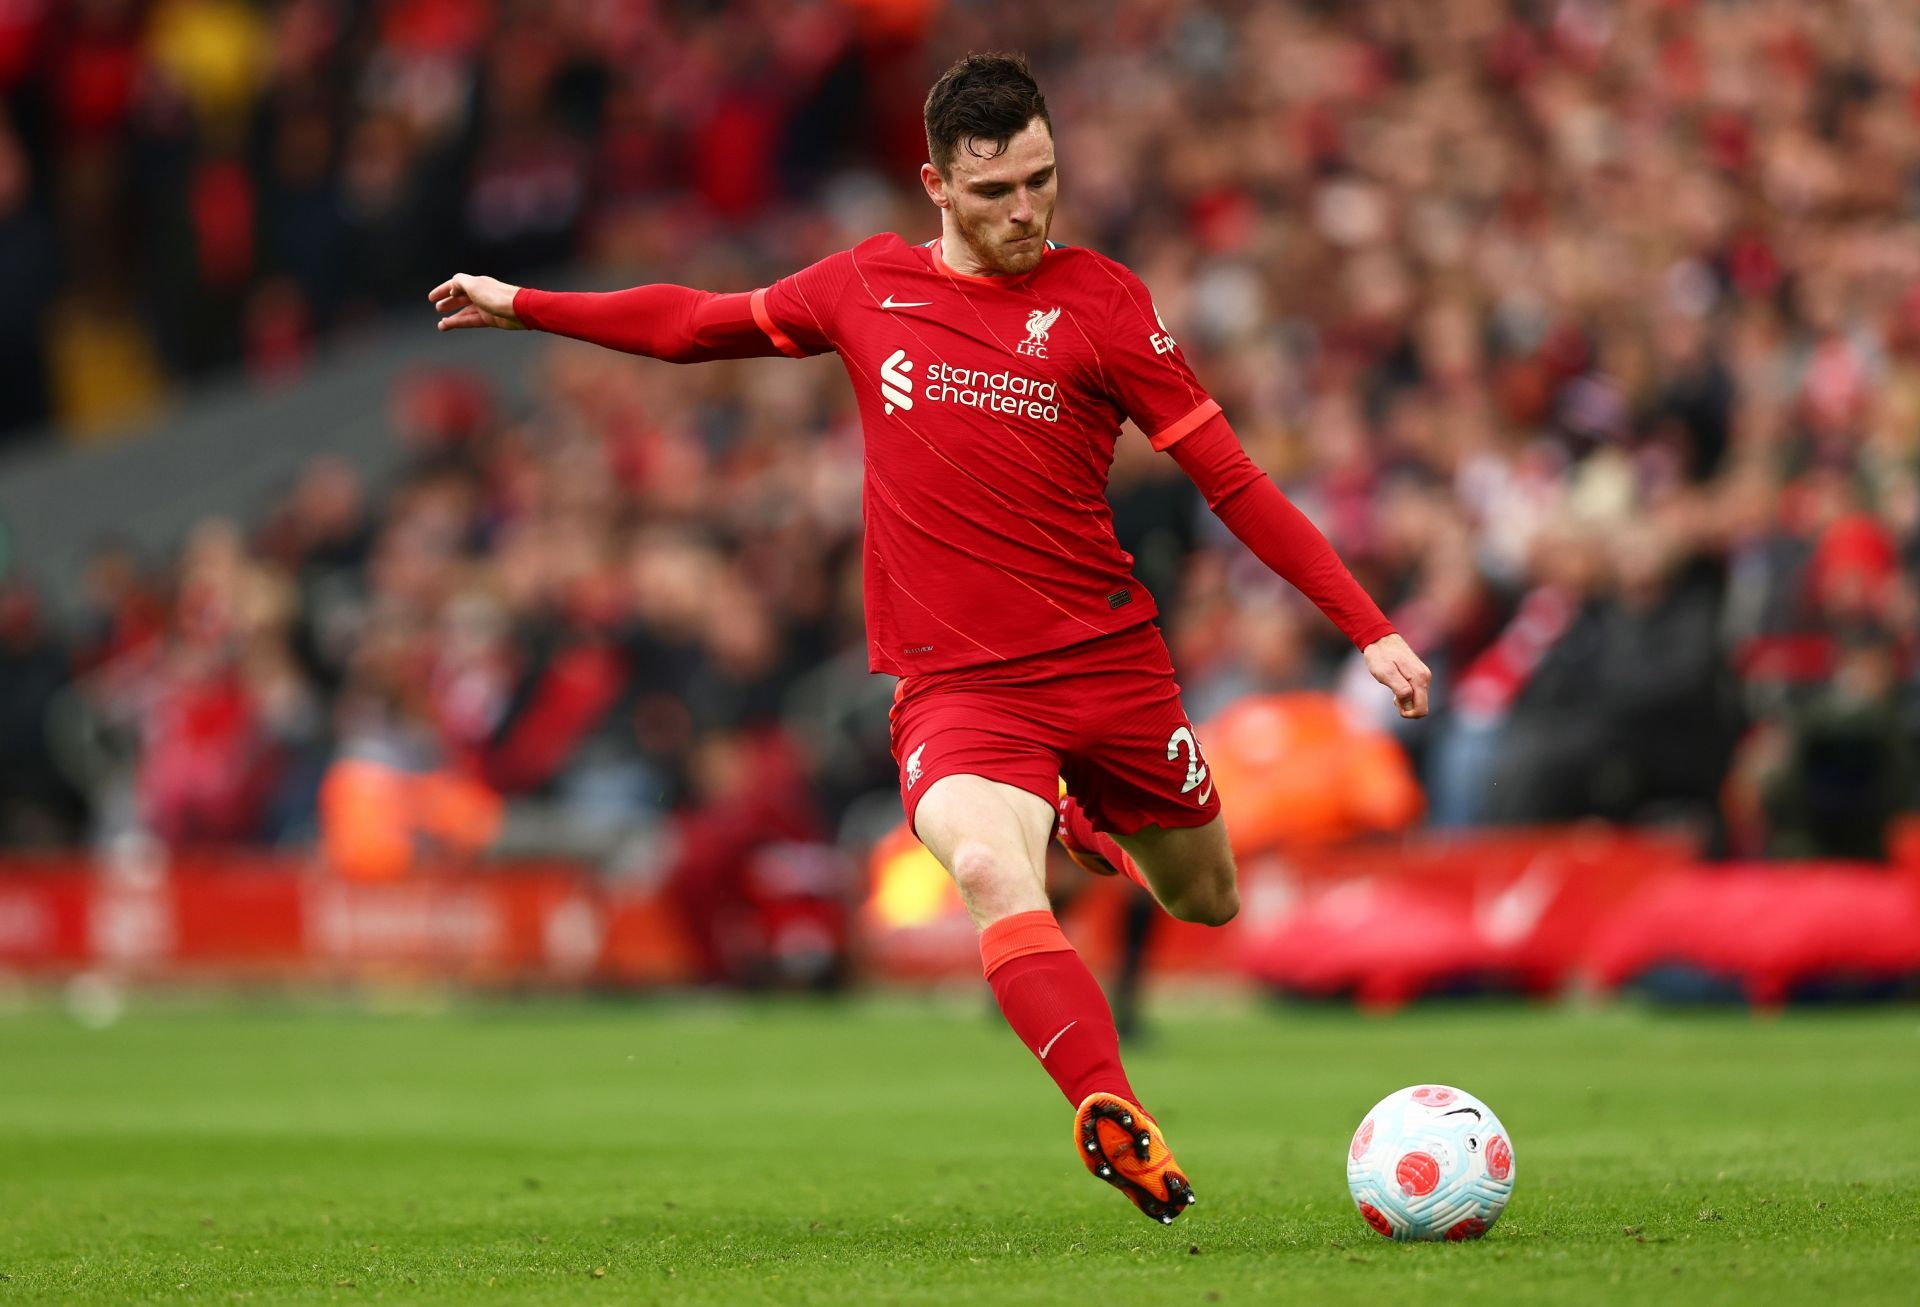 Andy Robertson has been vital for the Reds